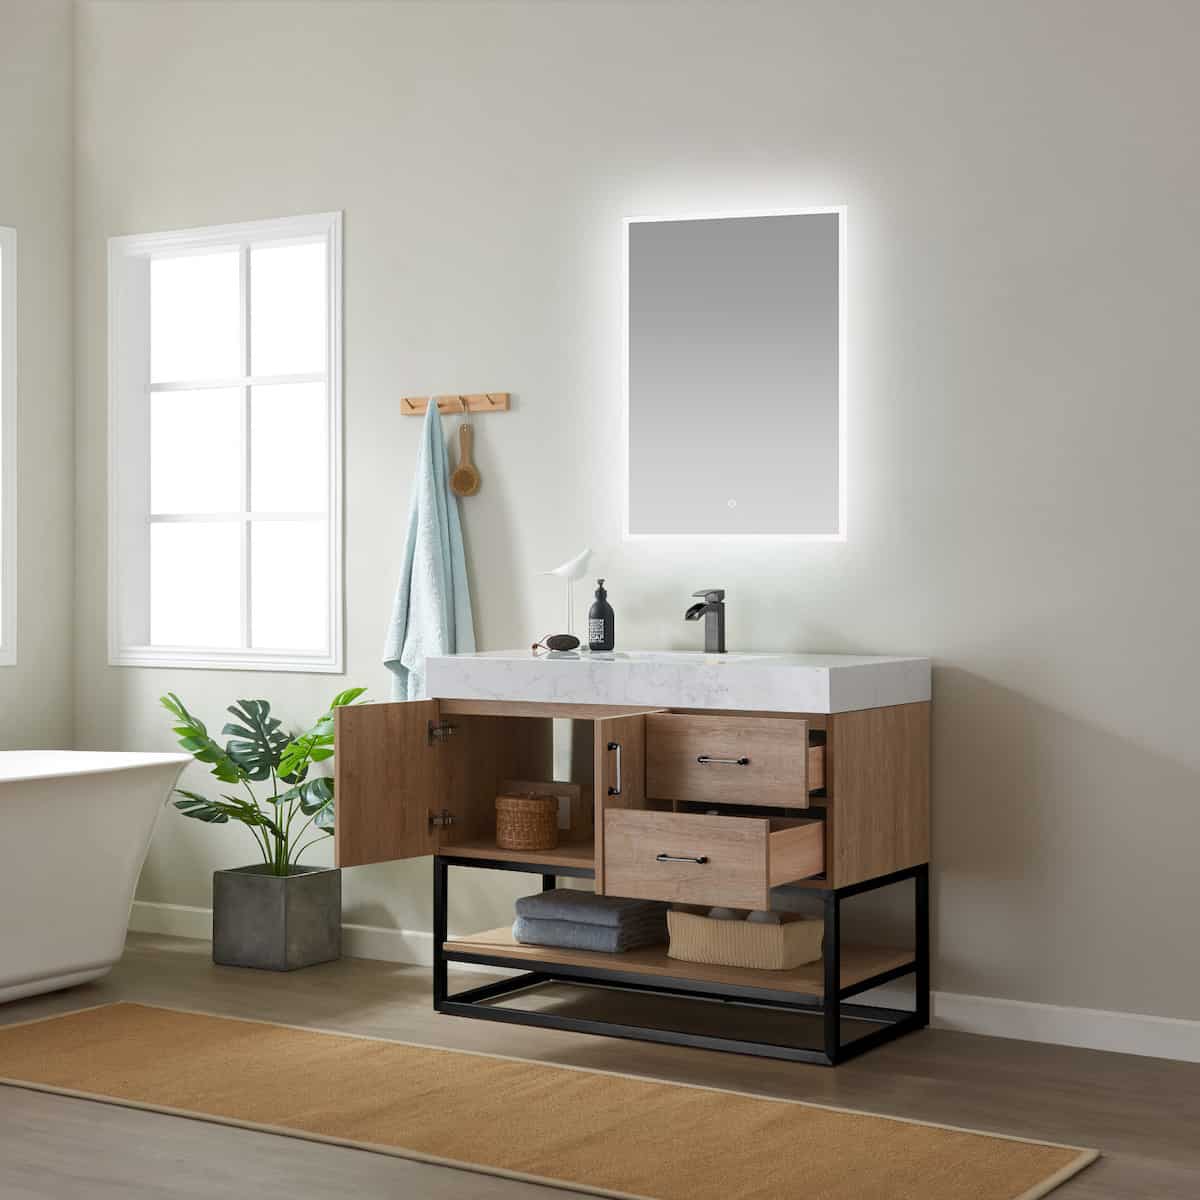 Vinnova Alistair 42 Inch Freestanding Single Vanity in North American Oak and Matte Black Frame with White Grain Stone Countertop With Mirror Inside 789042B-NO-GW